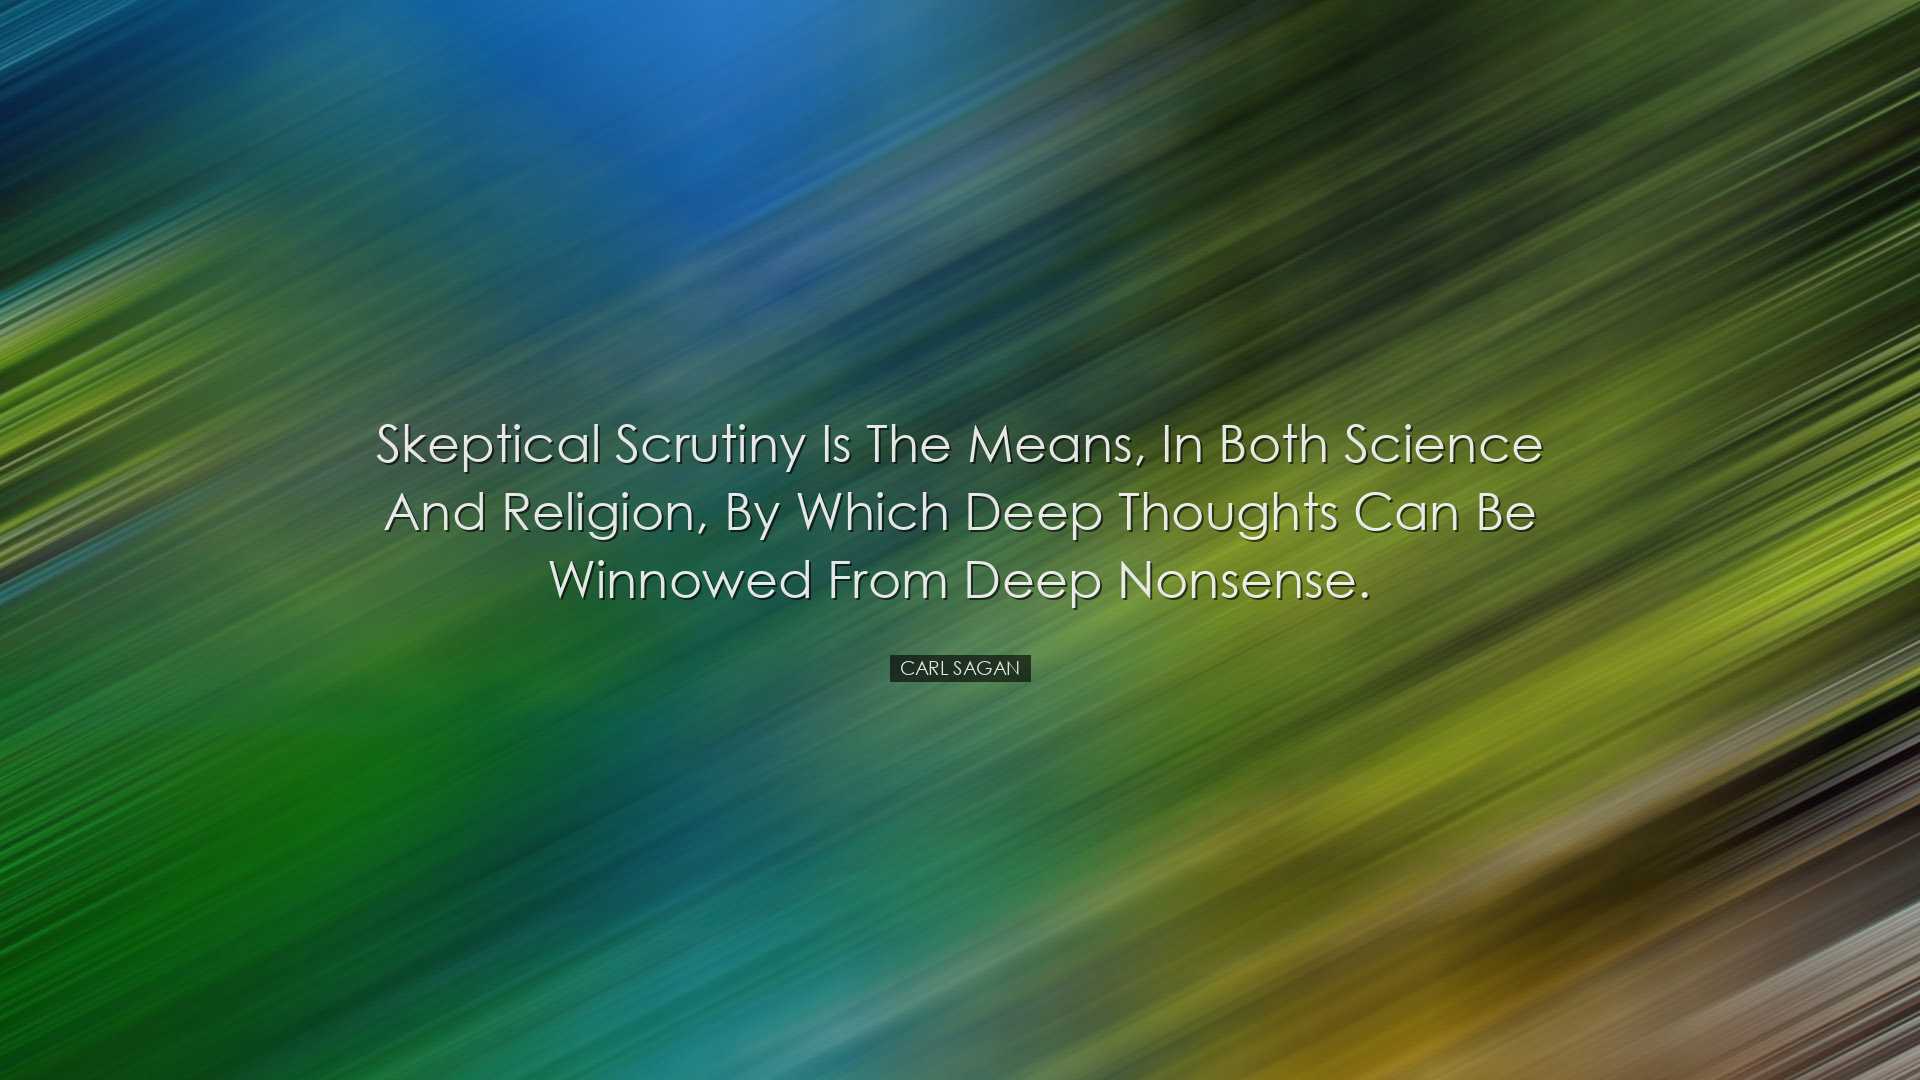 Skeptical scrutiny is the means, in both science and religion, by